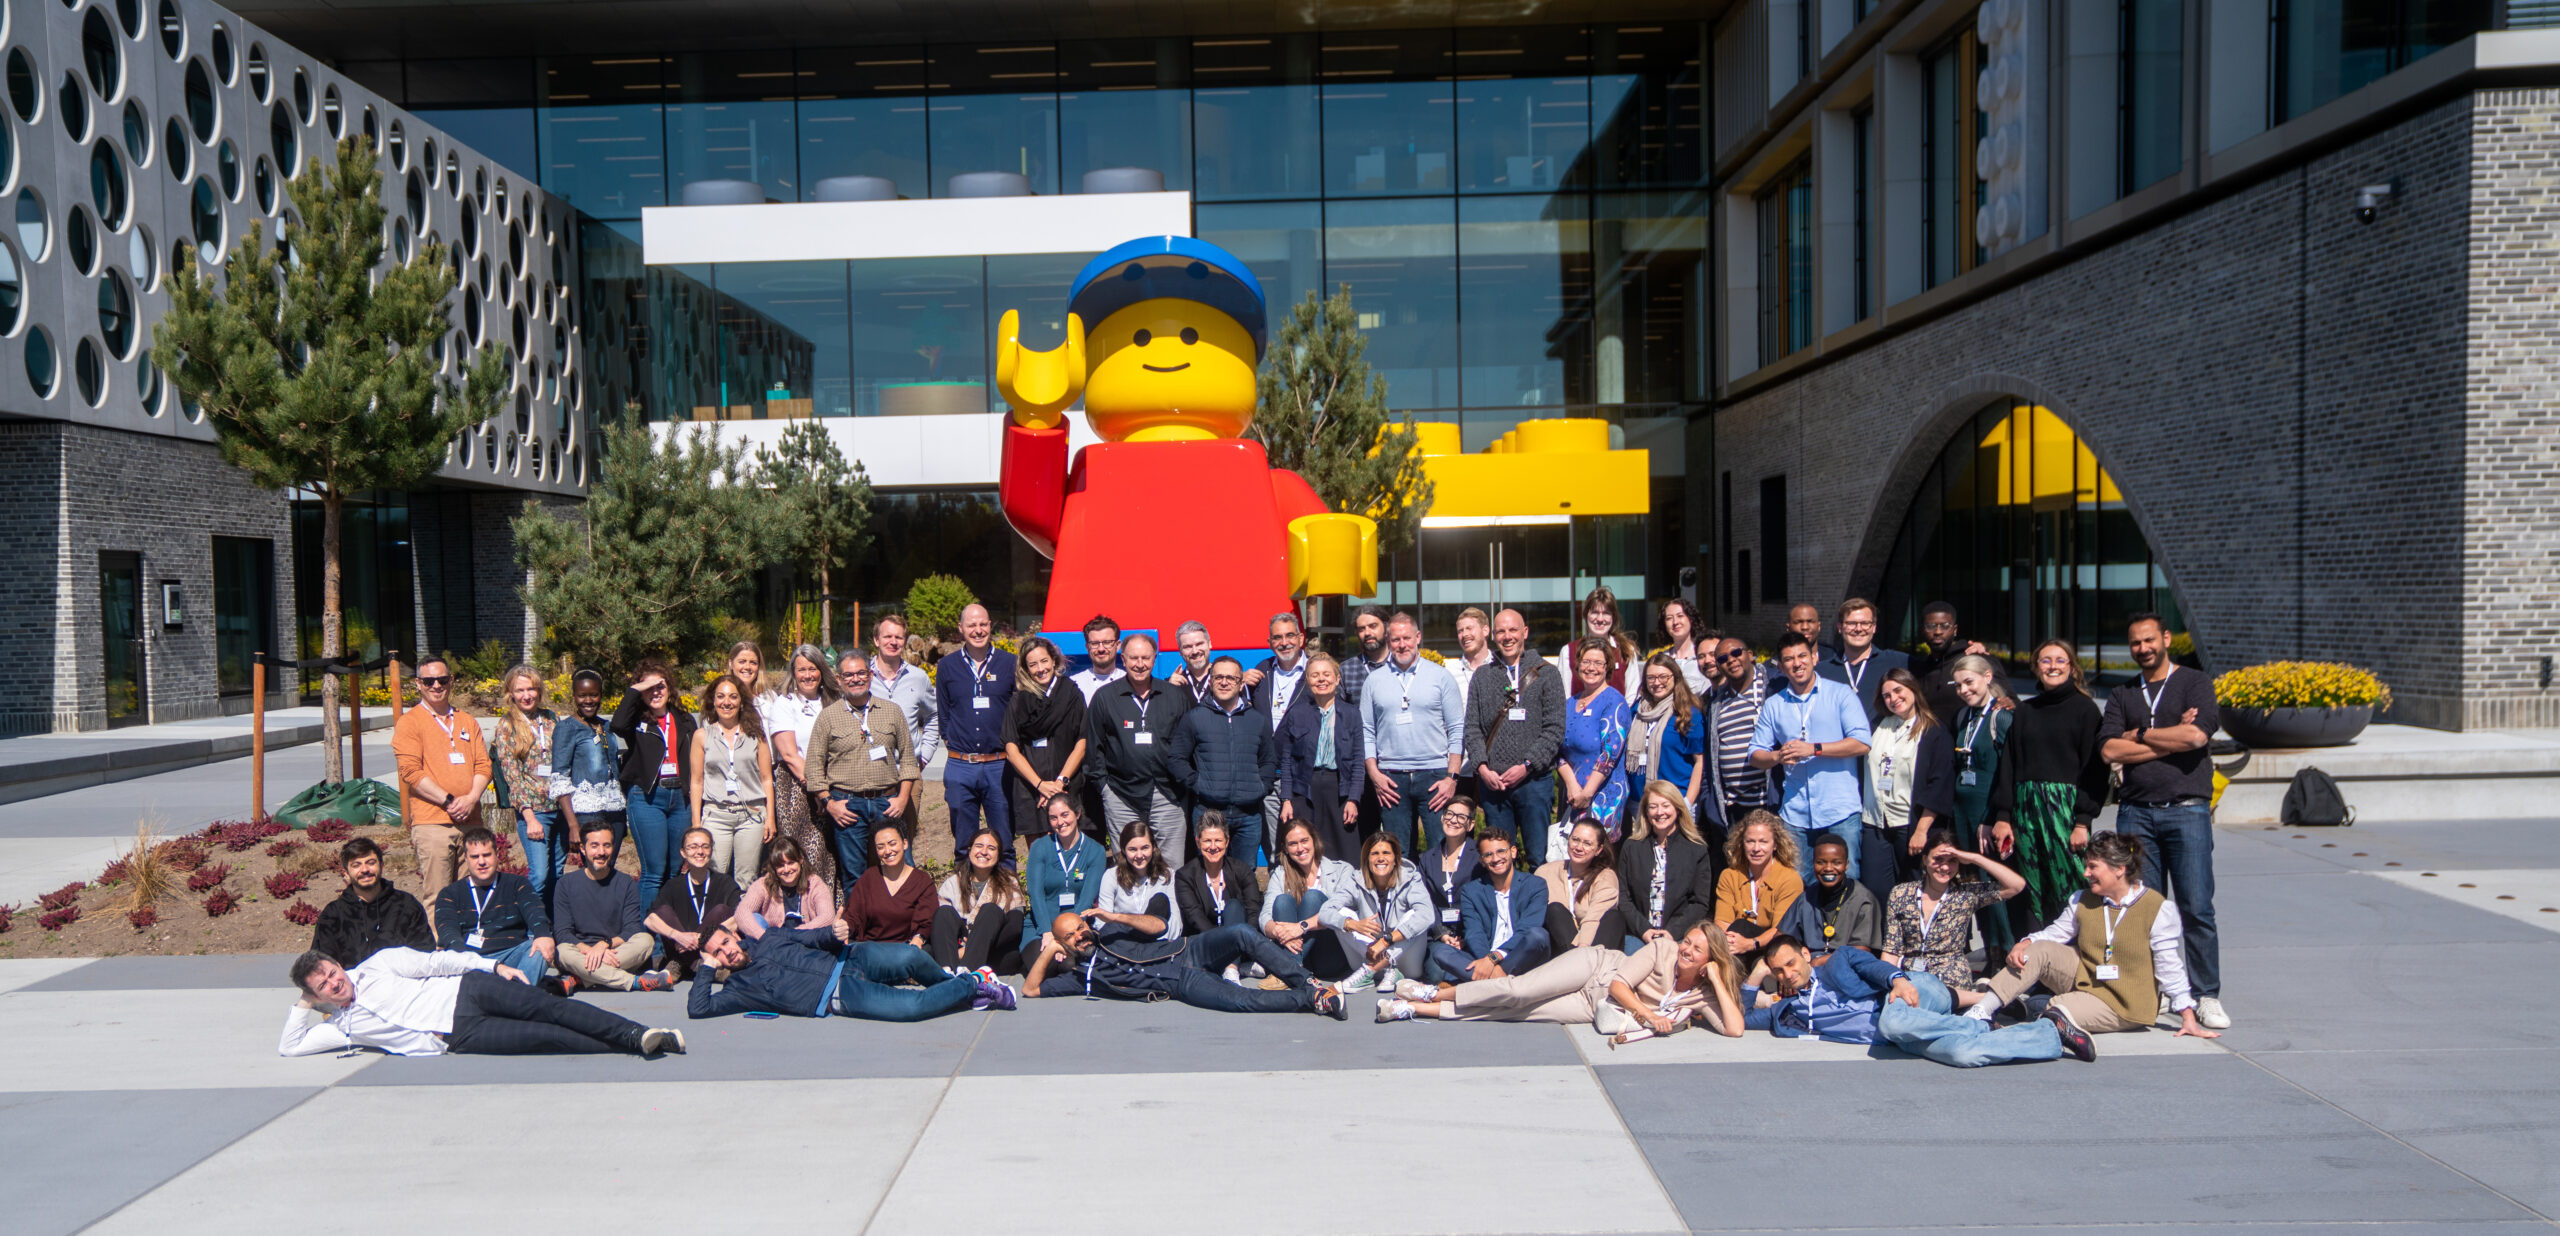 The Play for All participants, in front of Lego HQ in Billund, Denmark.